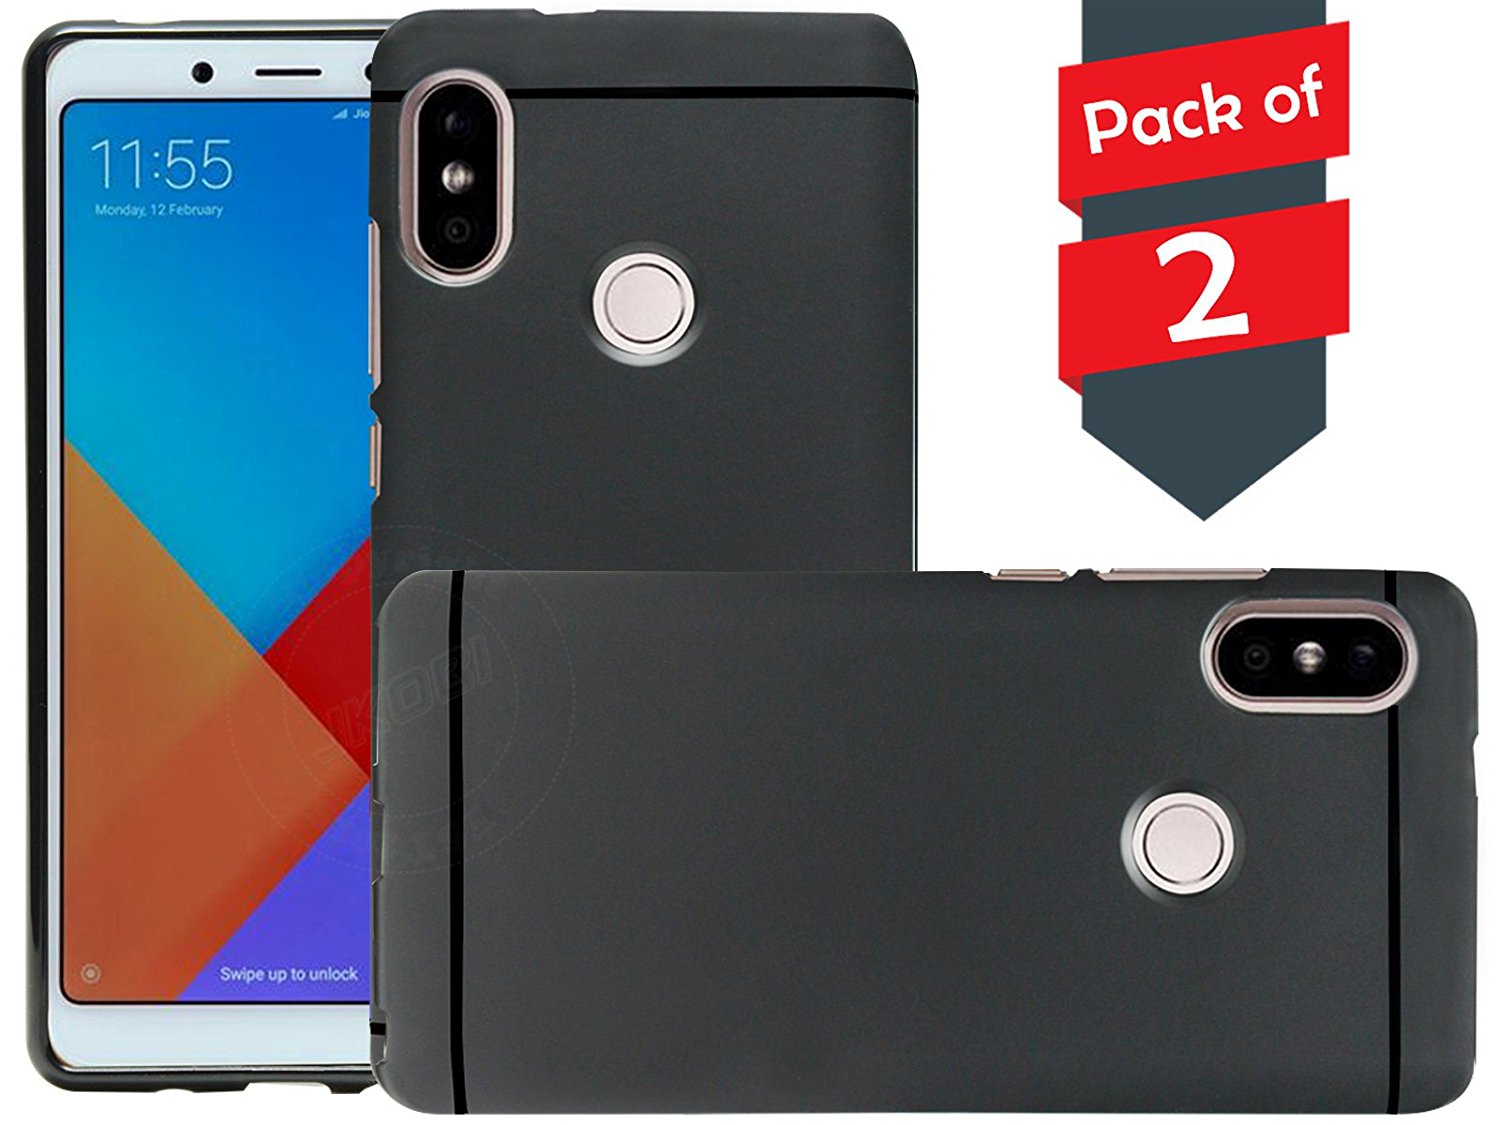 Buy Jkobi Matte Rubberised Soft Back Case Cover for Redmi Note 5 Pro (Pack of 2) at Rs 170 only